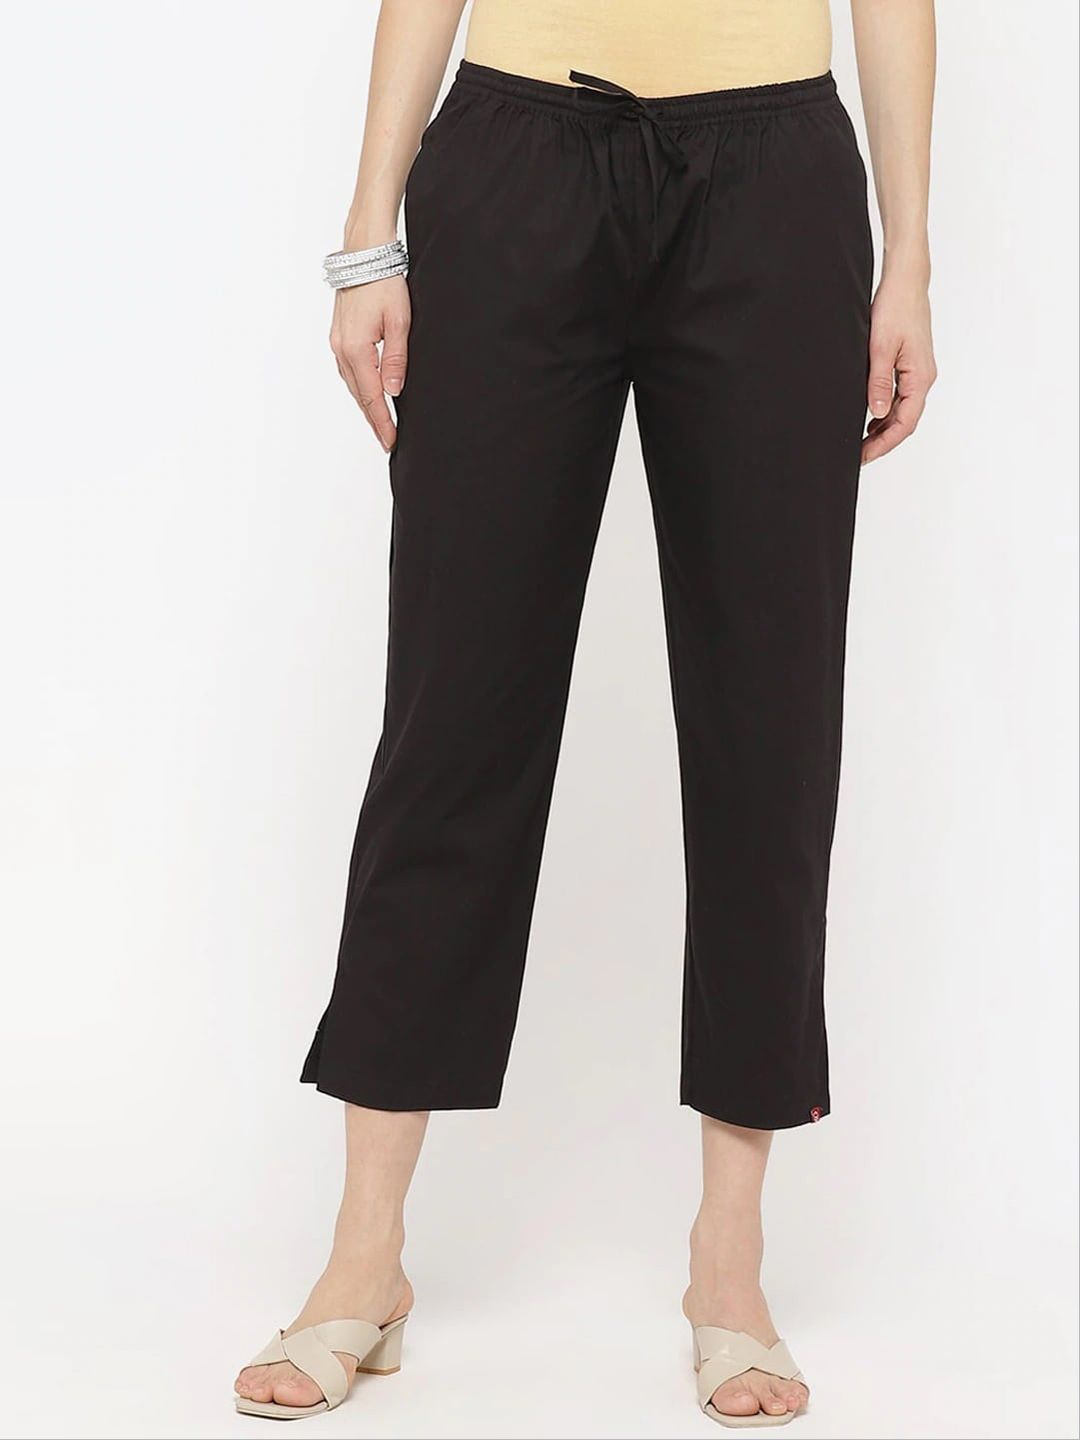 Biba Women Black Straight Fit Cotton Trousers Price in India